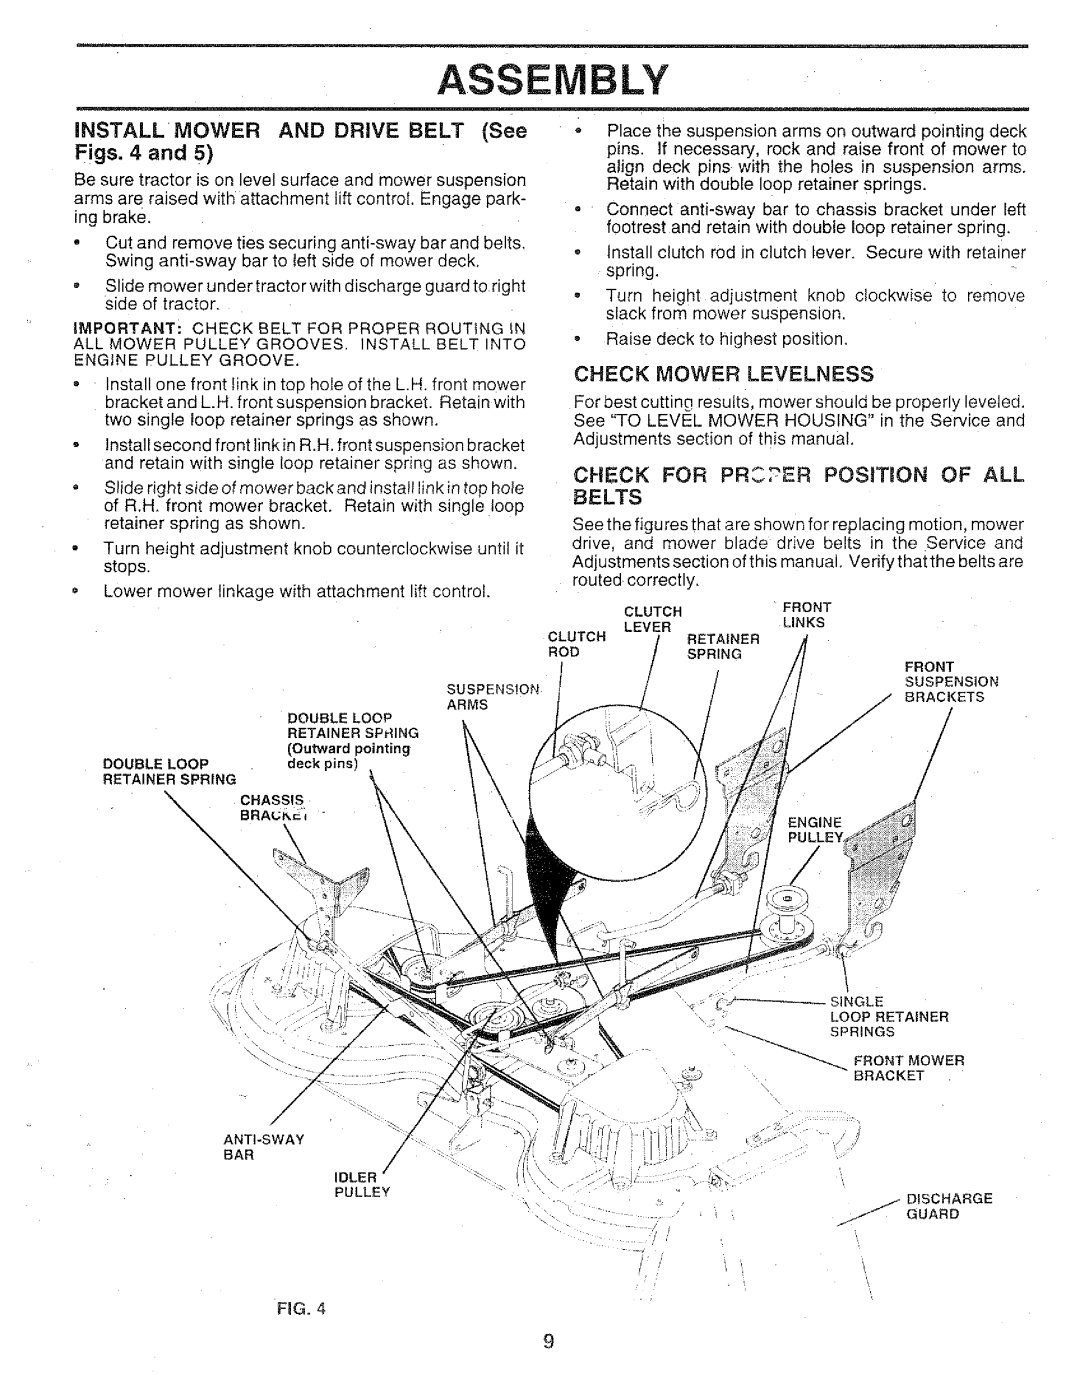 Sears 917.25147 owner manual Assembly, INSTALL MOWER AND DRIVE BELT See Figs. 4 and, CHECK FOR PRC2ER POSITION OF ALL BELTS 